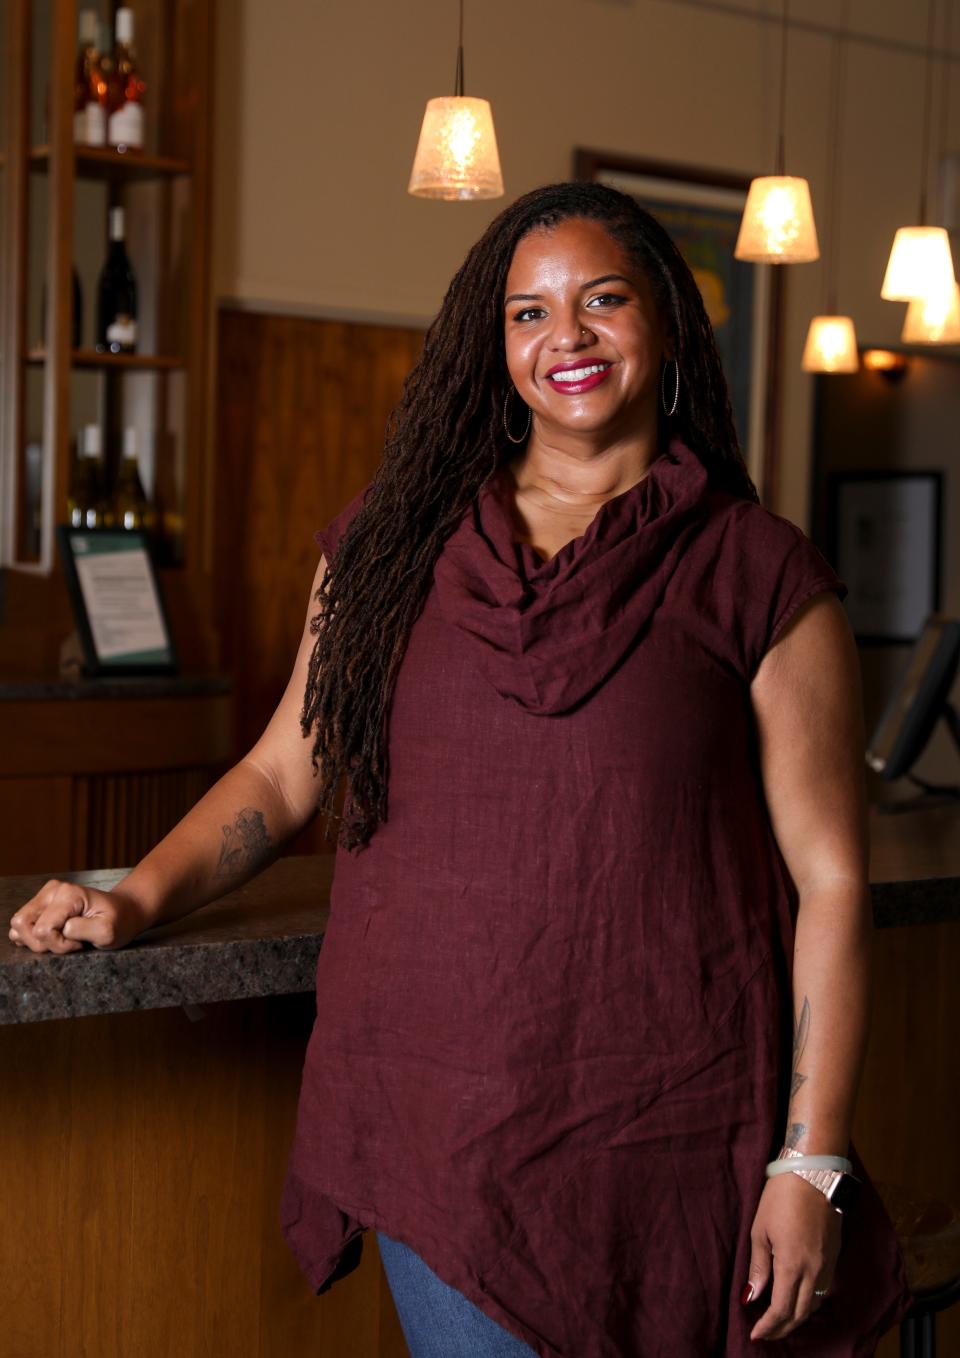 Tiquette Bramlett founded Our Legacy Harvested which champions diversity in the wine industry and provides paid internships to the BIPOC community.